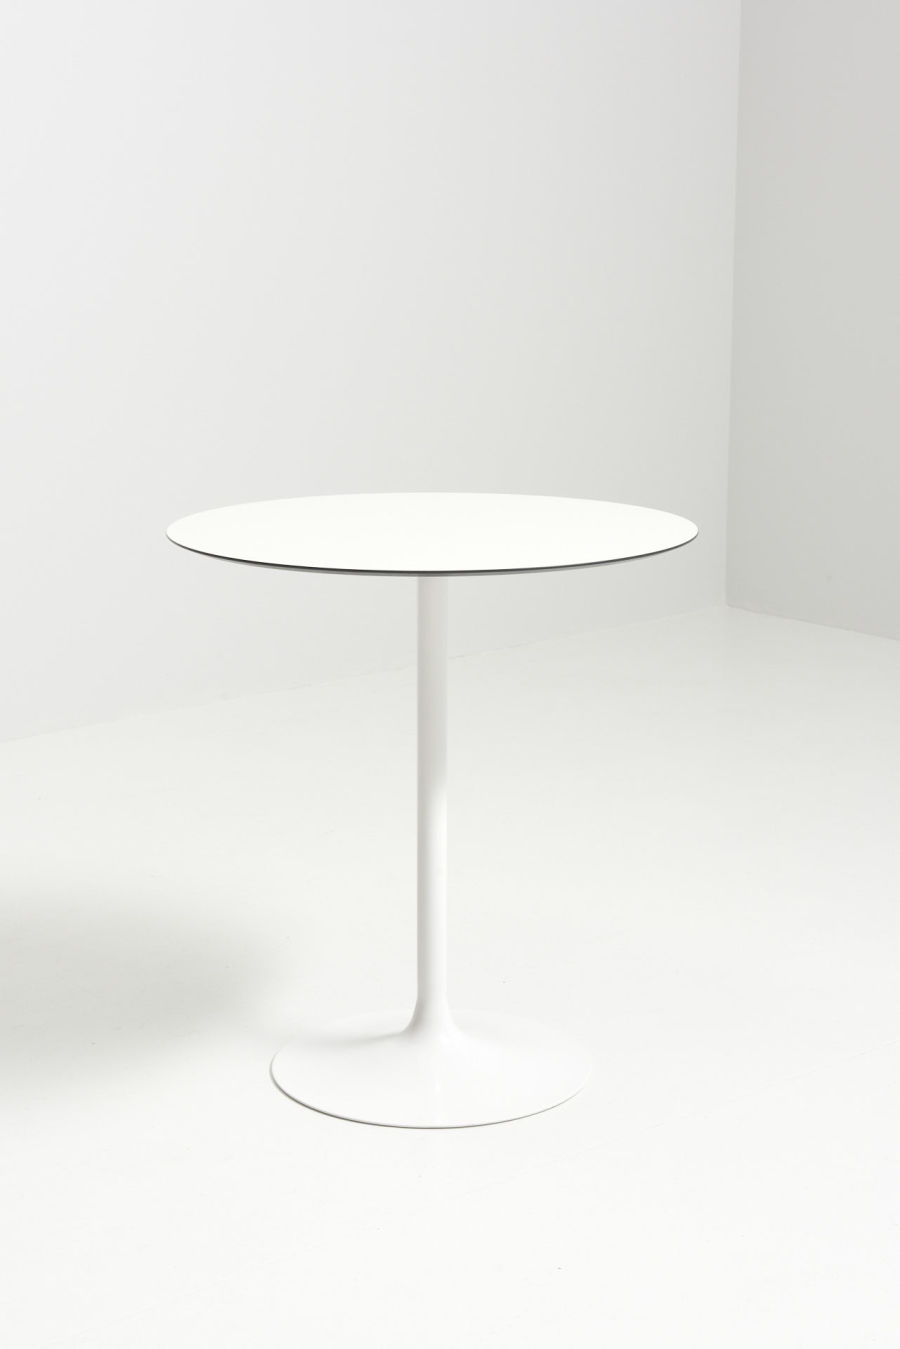 modestfurniture-vintage-3002-small-dining-table-tulip-foot05